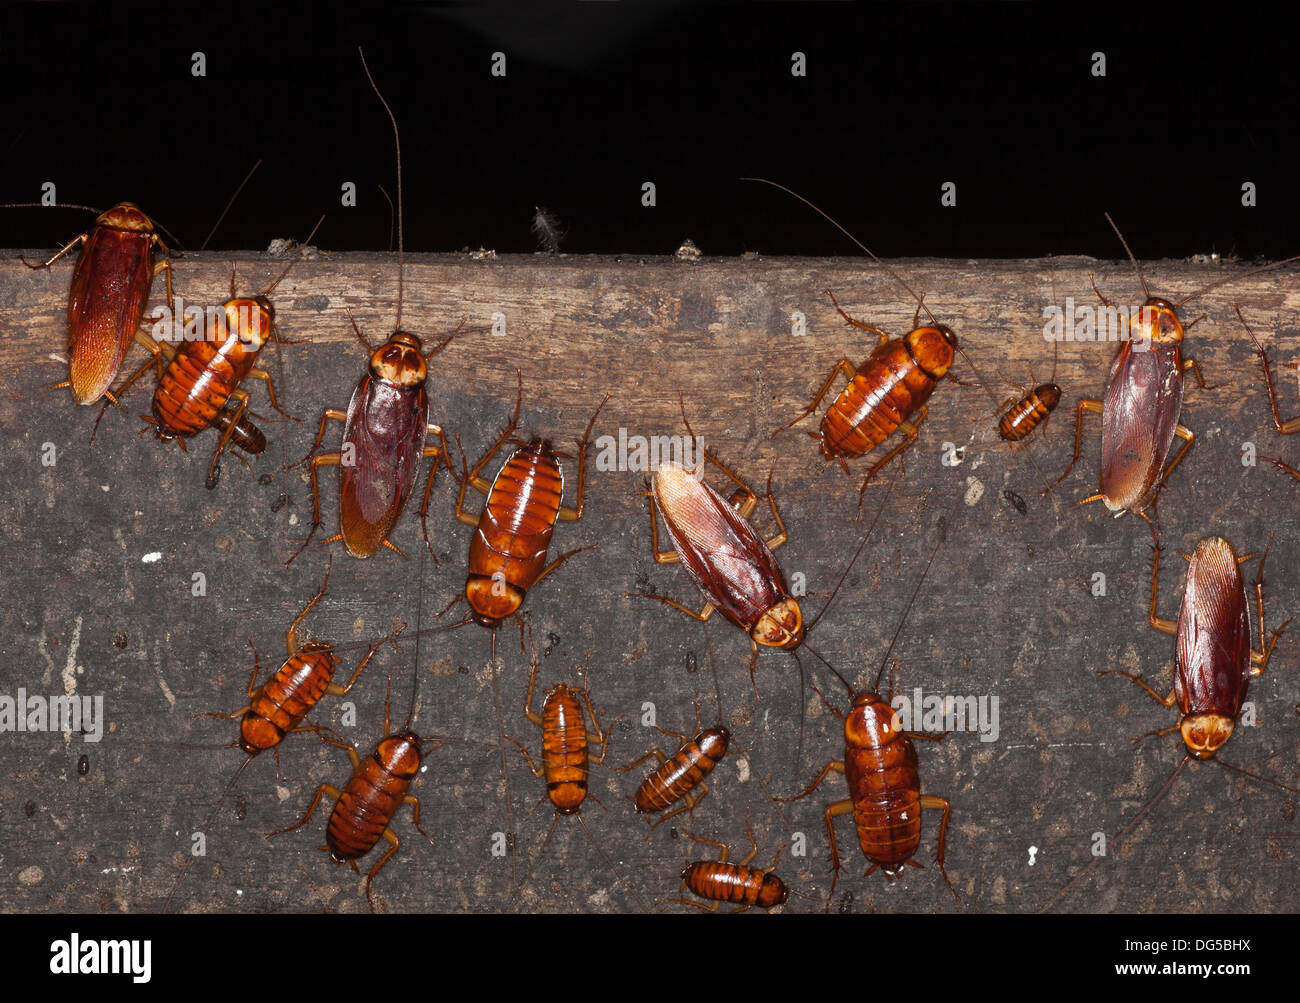 Australian cockroaches (Periplaneta australasiae) at various developmental stages on handrail in Gomantong Cave Stock Photo